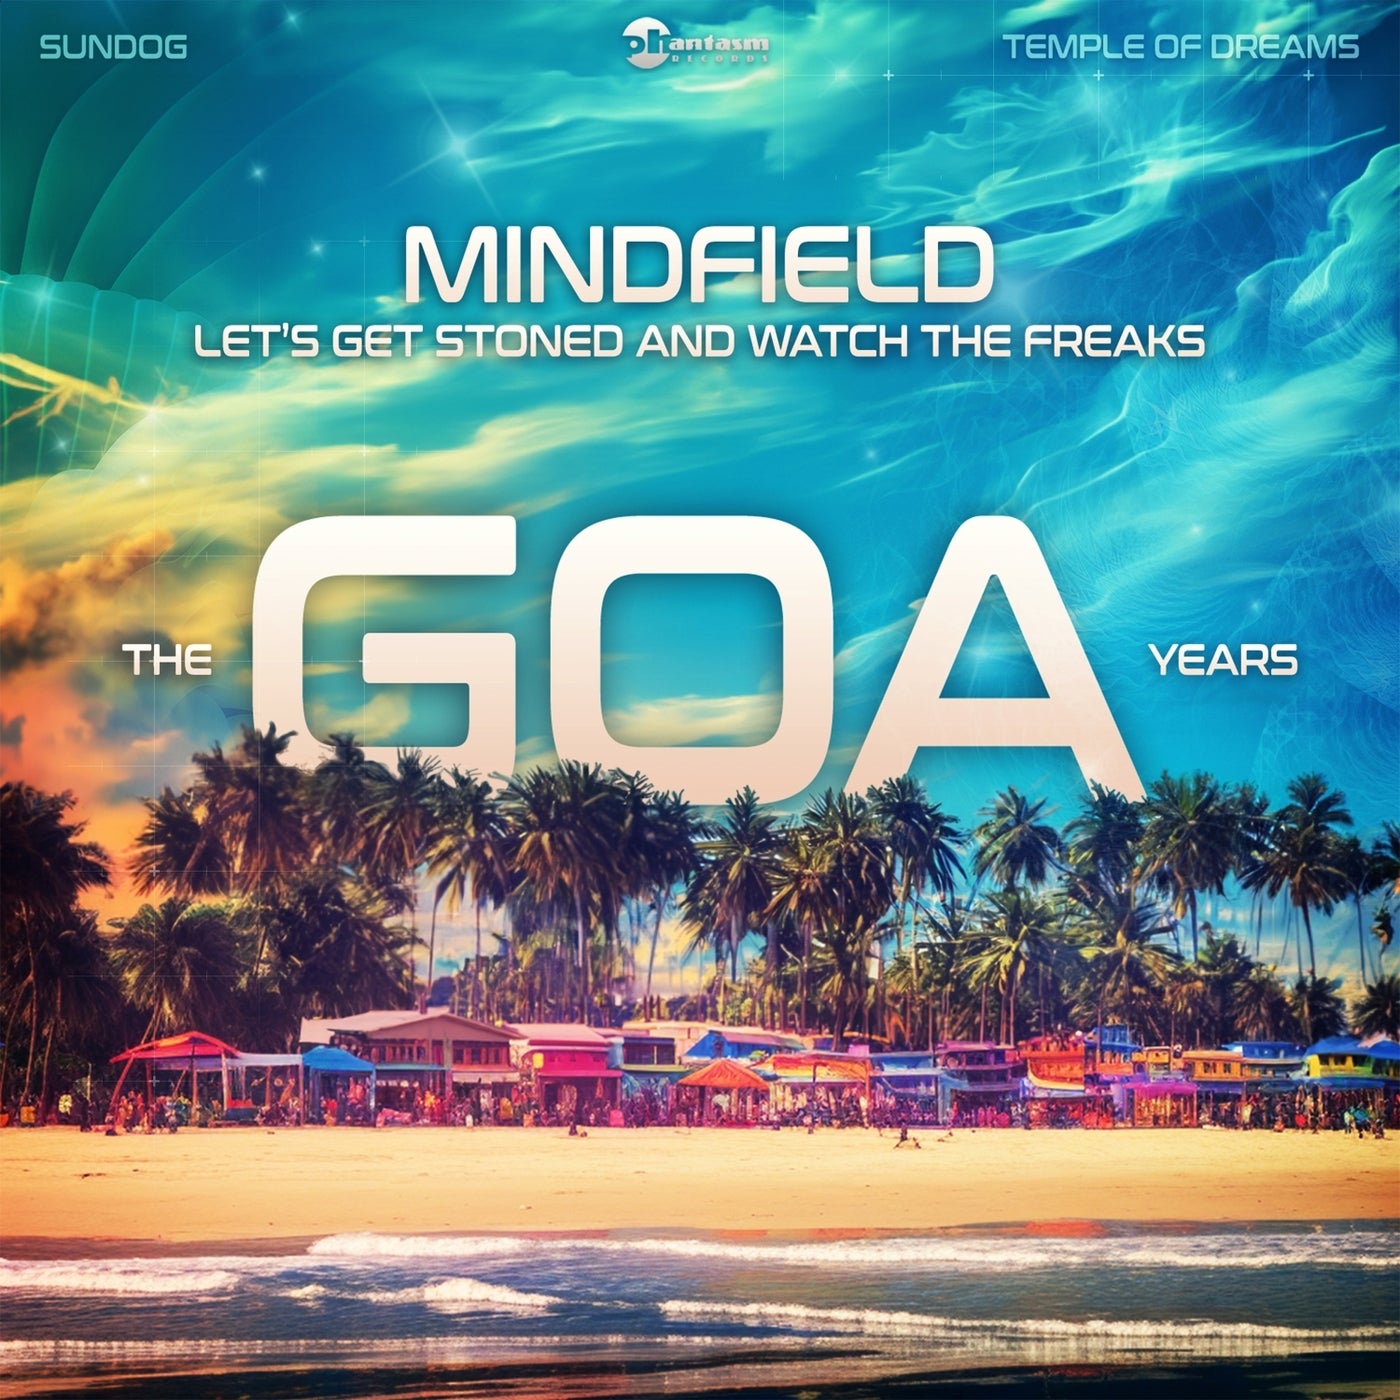 Let's Get Stoned and Watch the Freaks - The Goa Years